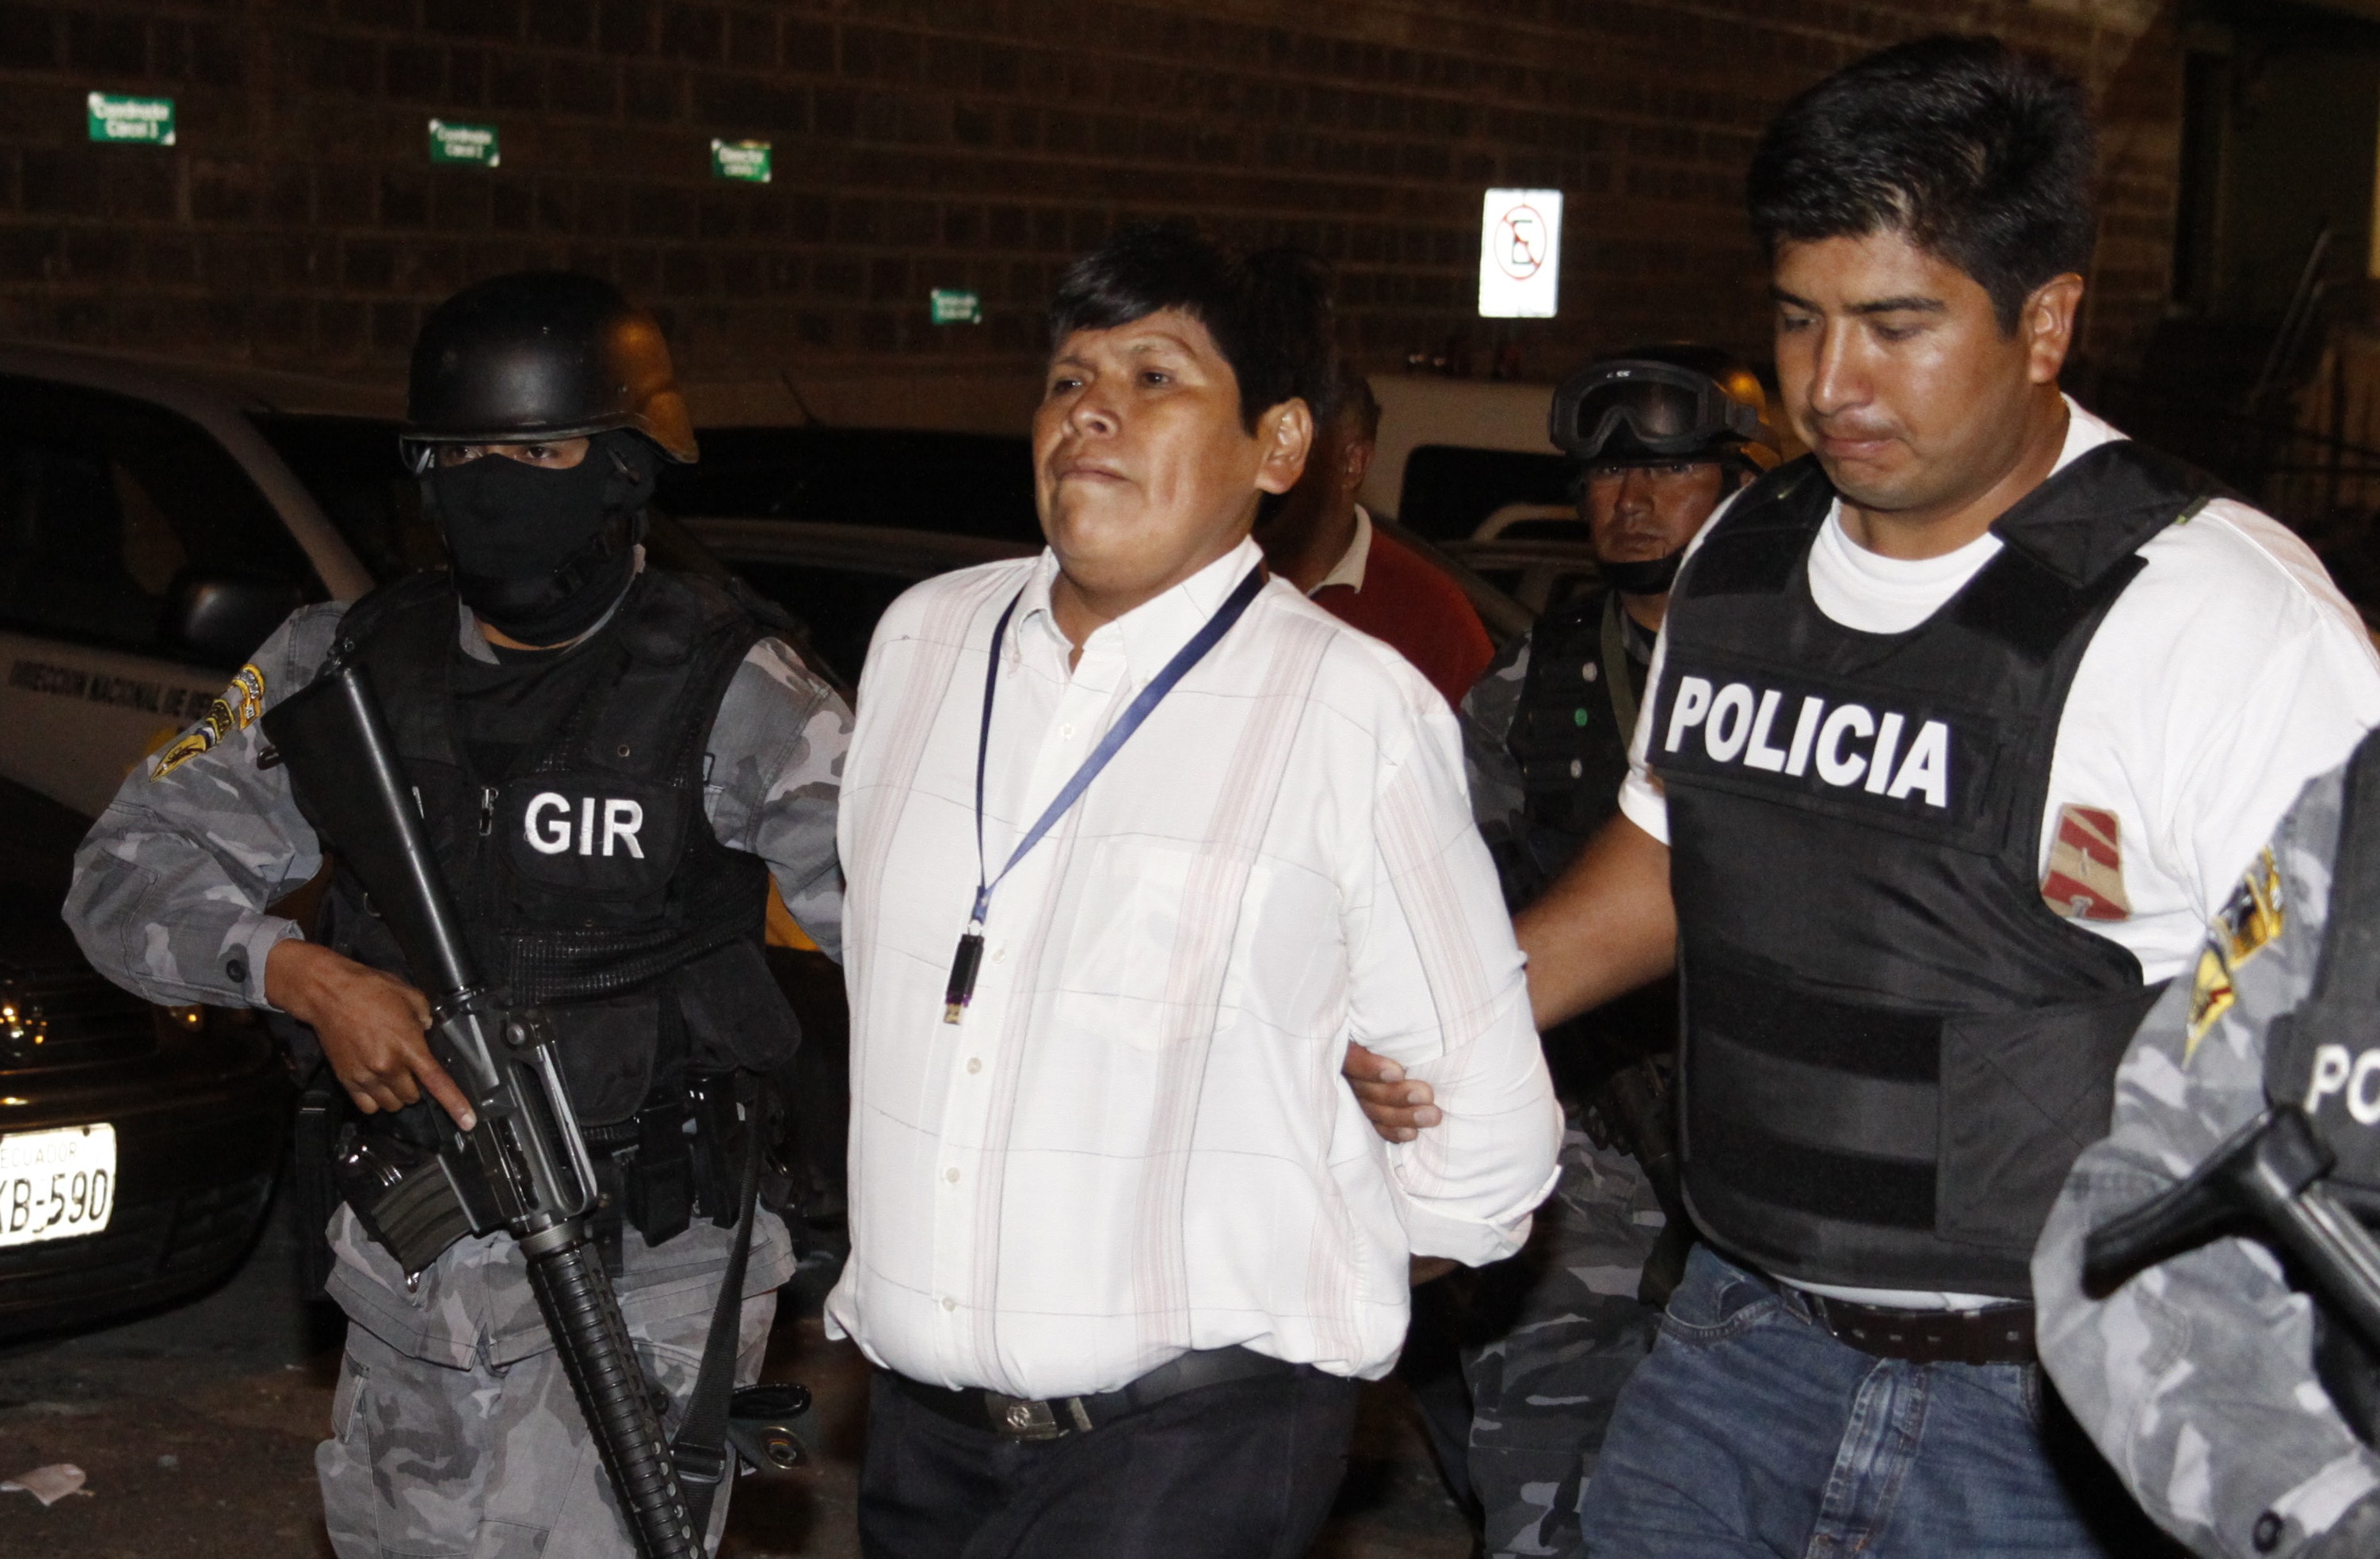 Indigenous leader Pepe Acacho escorted by police in 2011, when he was first arrested for the crimes of sabotage and terrorism, AP